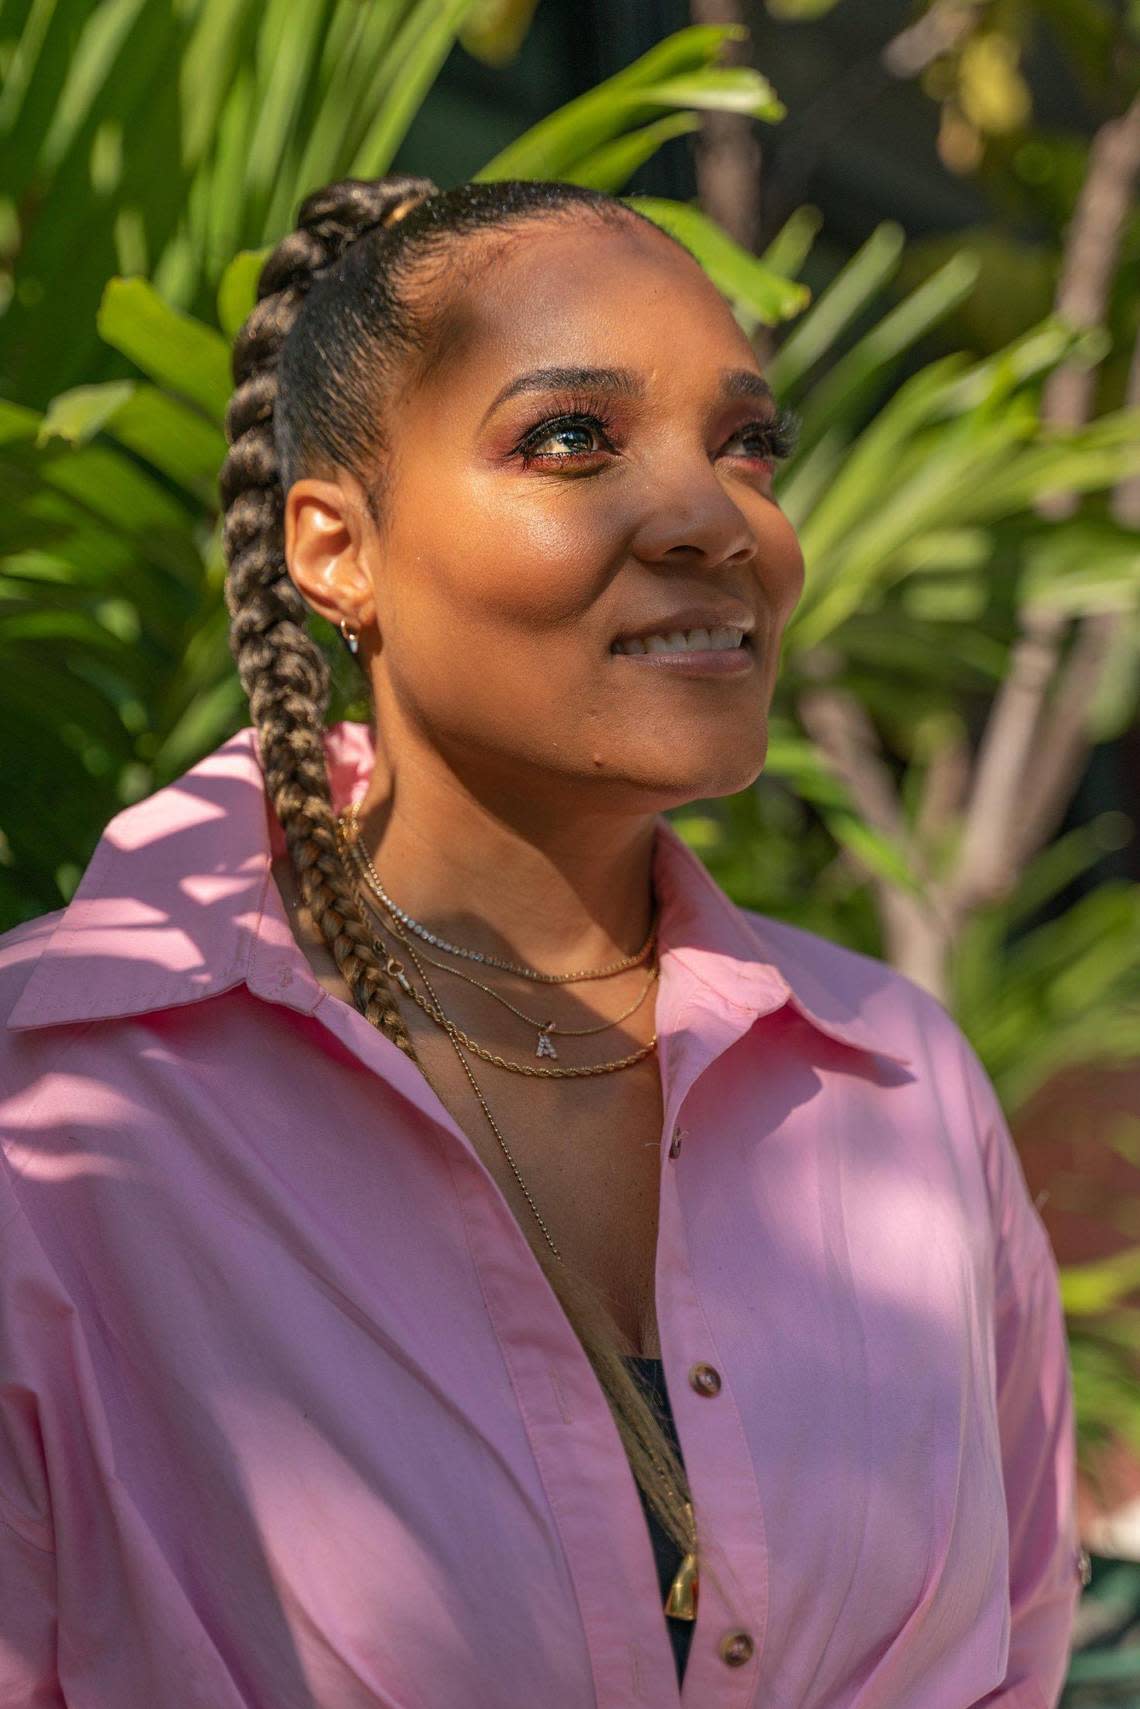 Chef at Large Amaris Jones, a Philadelphia native, is tasked with adding new recipes and bridging the gap between the Miami community and Red Rooster Overtown.